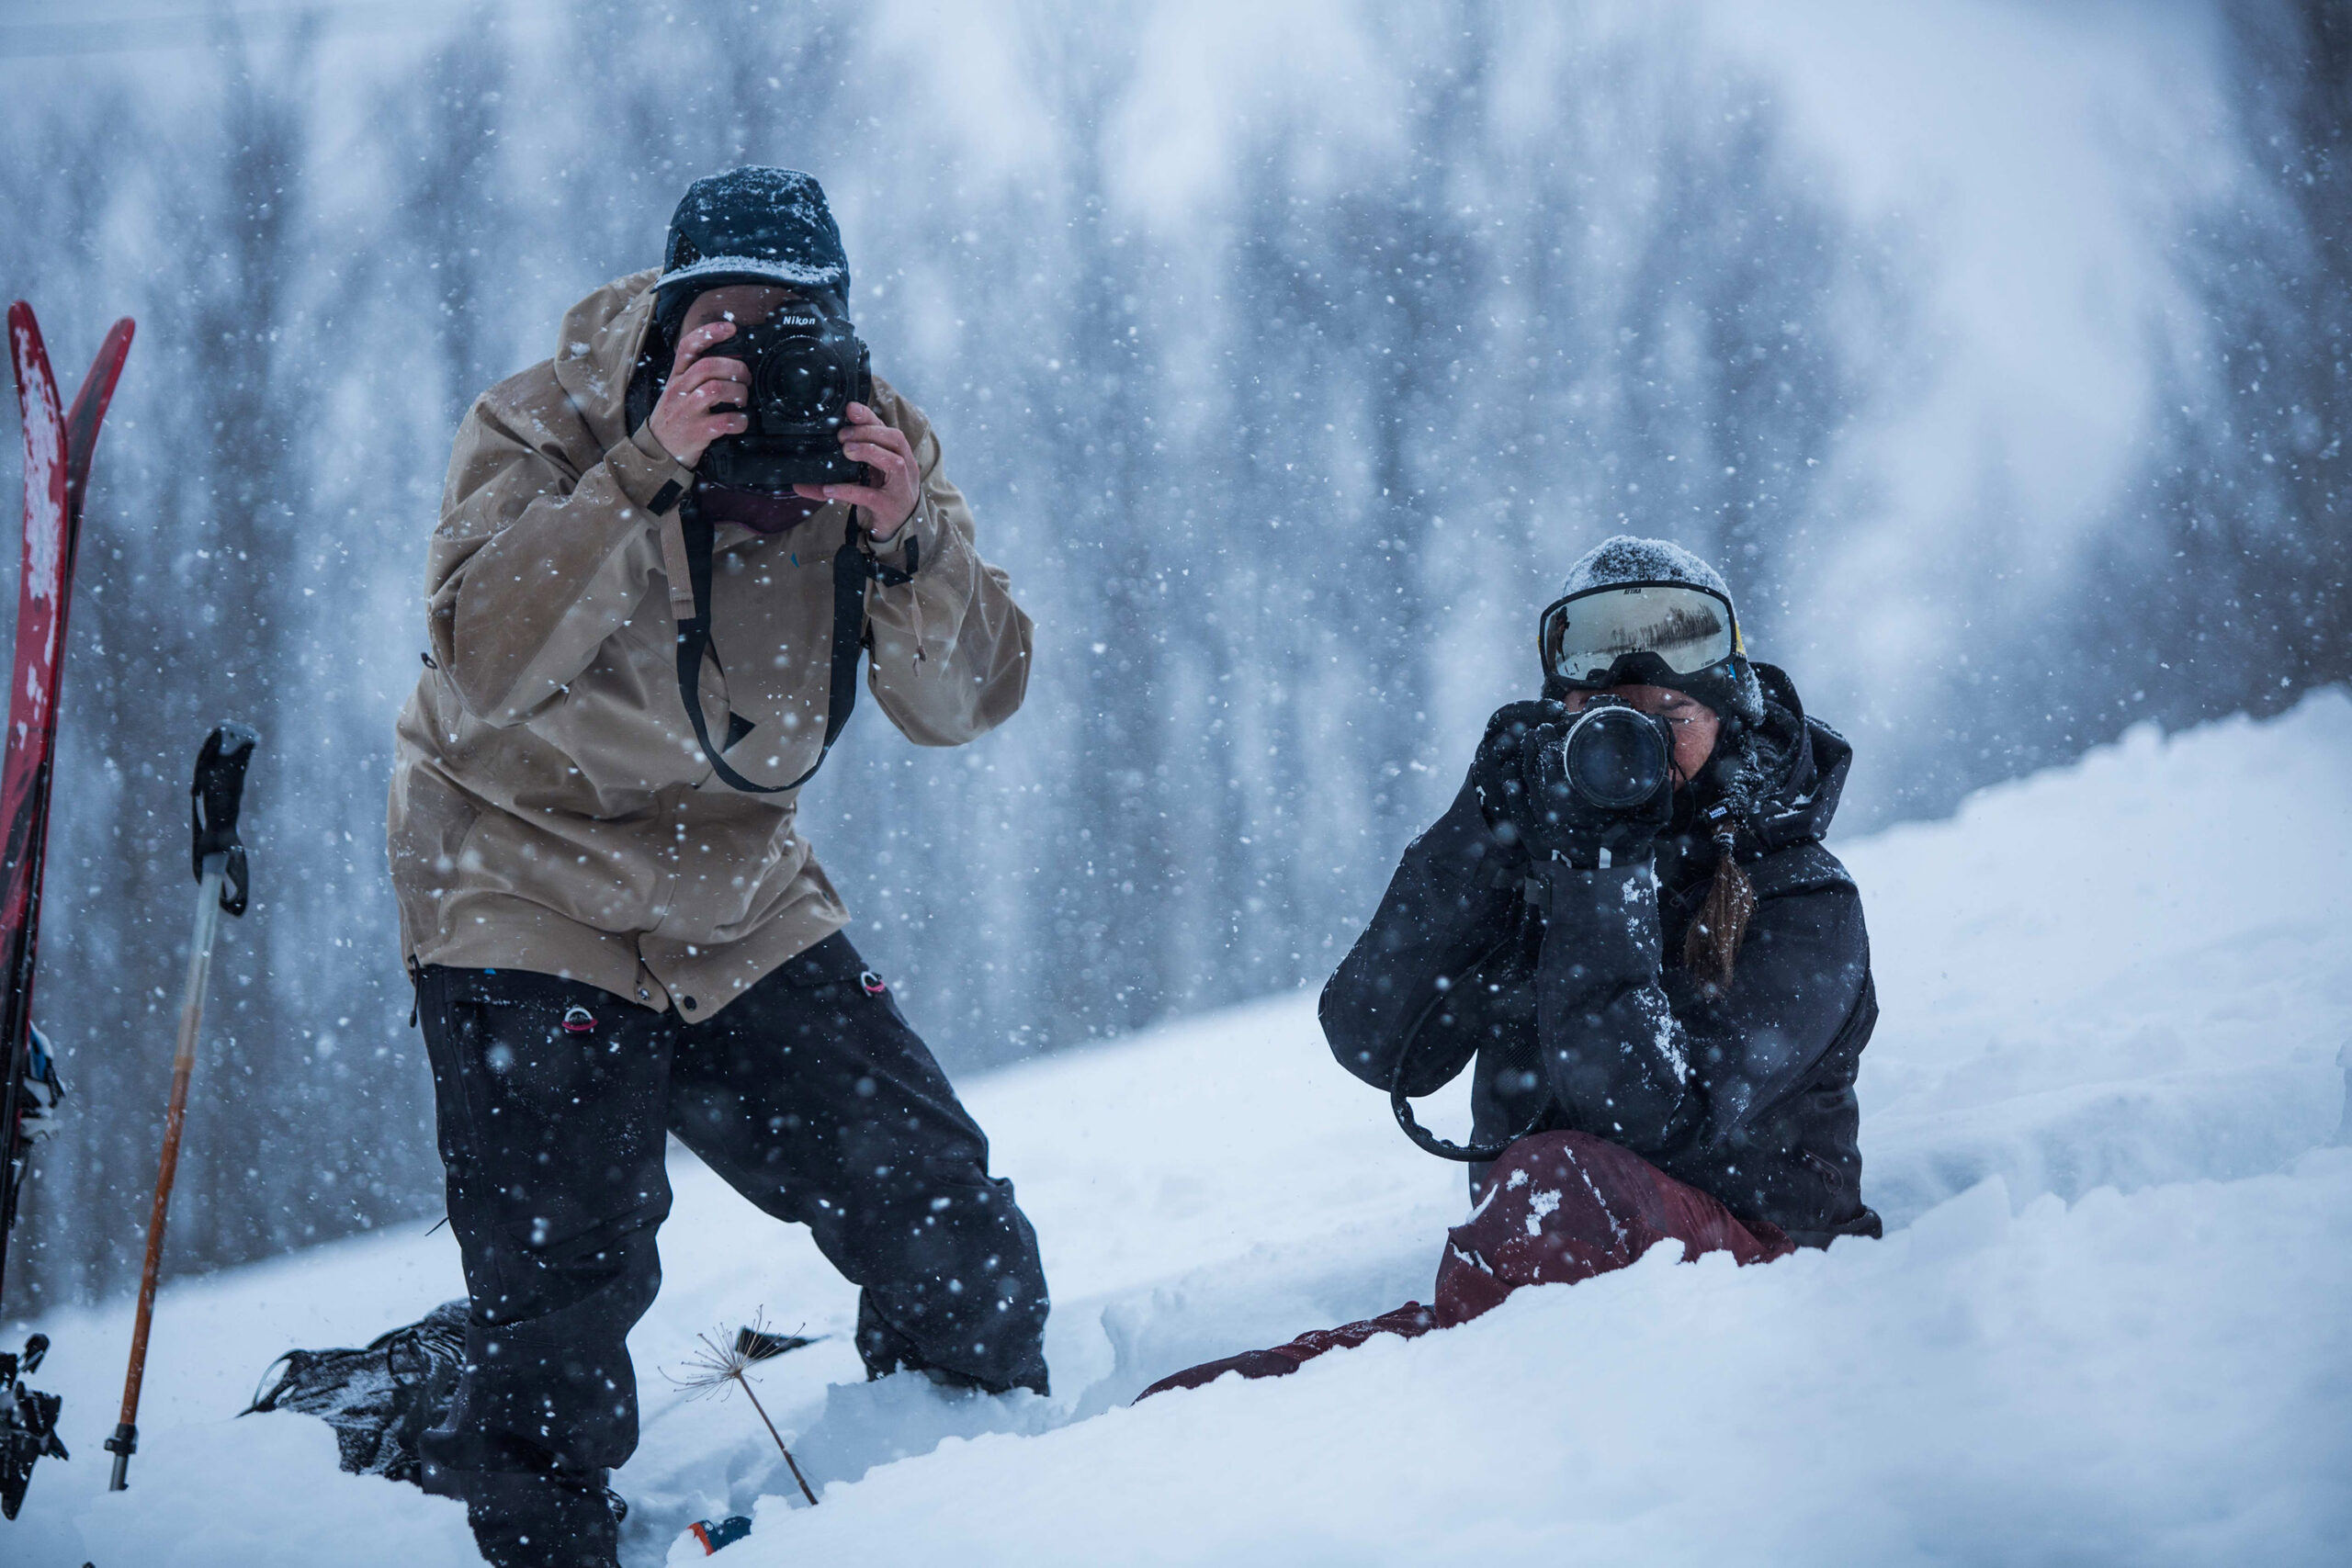 two photographers look through the lens of their camera, right at the picture-taking camera, standing and kneeling in deep snow, the skeletons of trees blurred in background